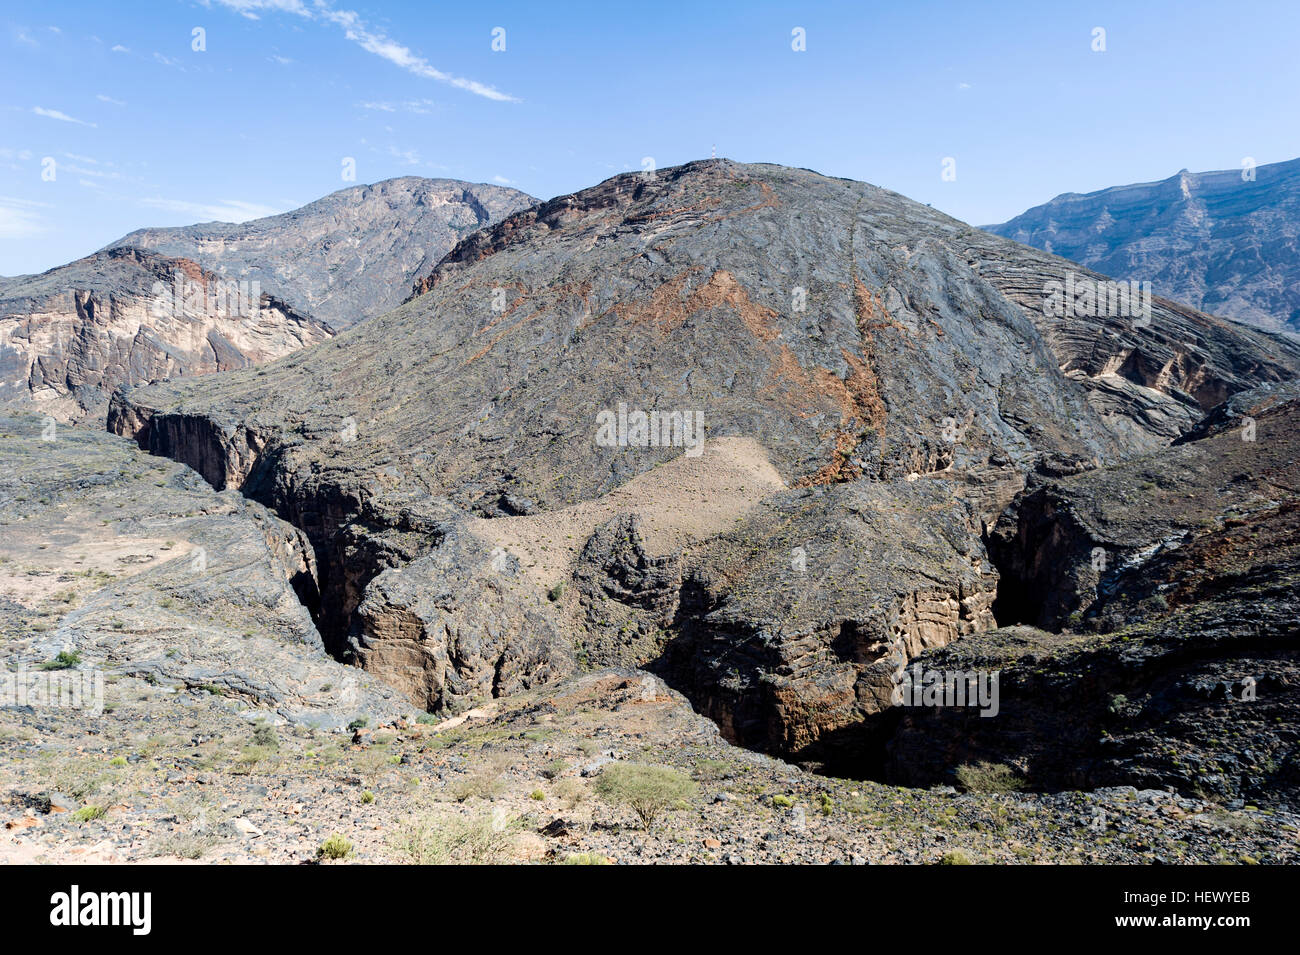 A jagged and winding canyon eroded by a river in a rocky desert. Stock Photo